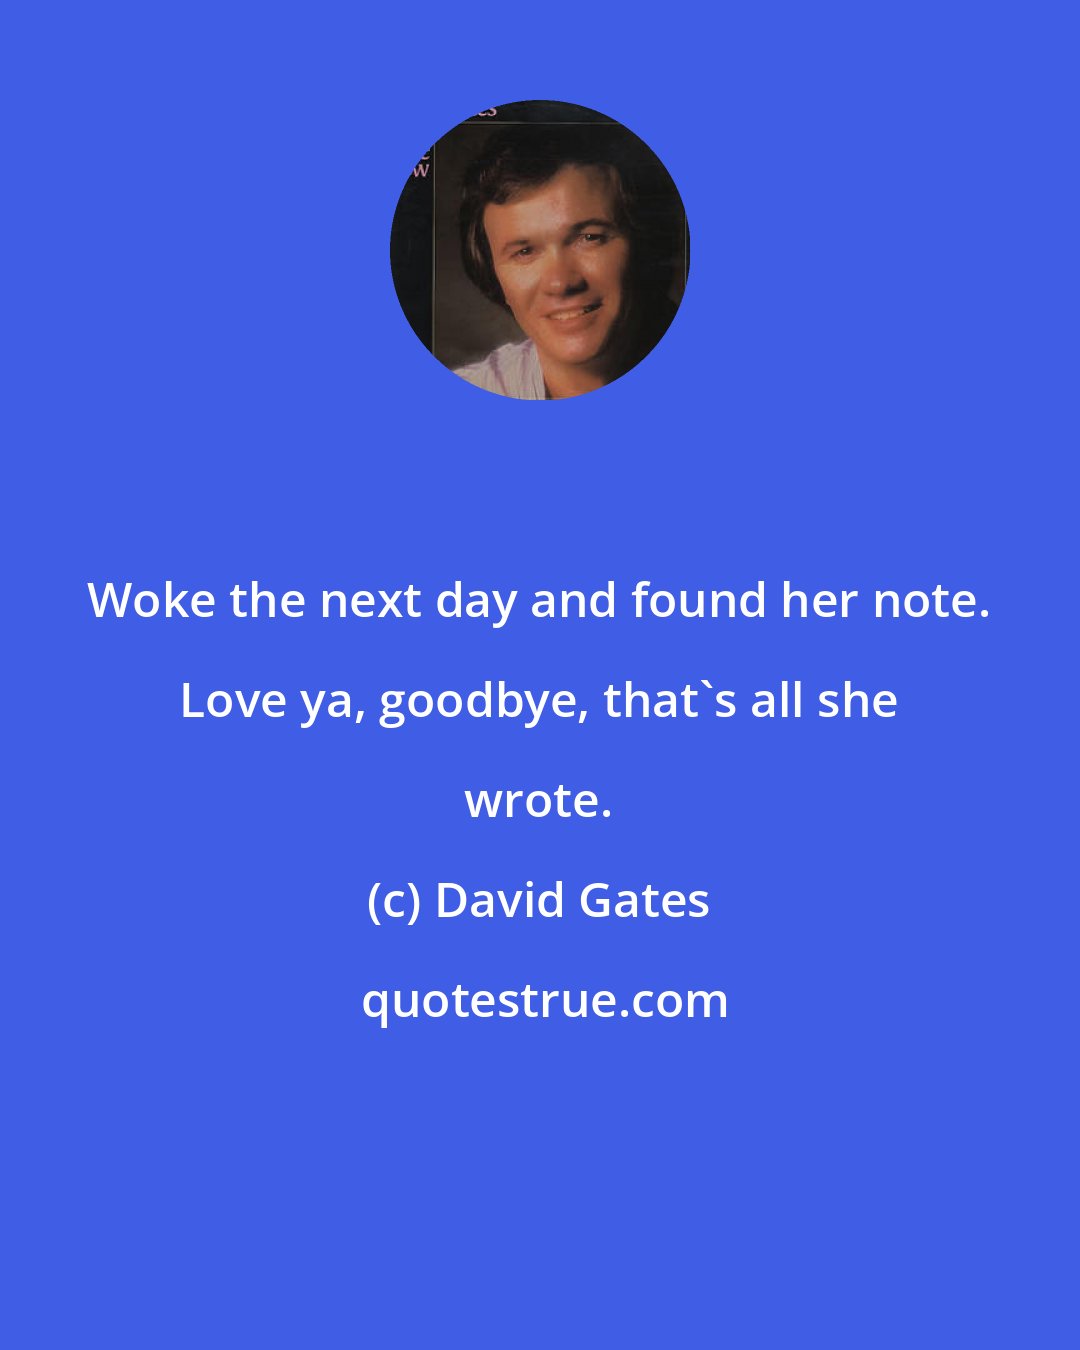 David Gates: Woke the next day and found her note. Love ya, goodbye, that's all she wrote.